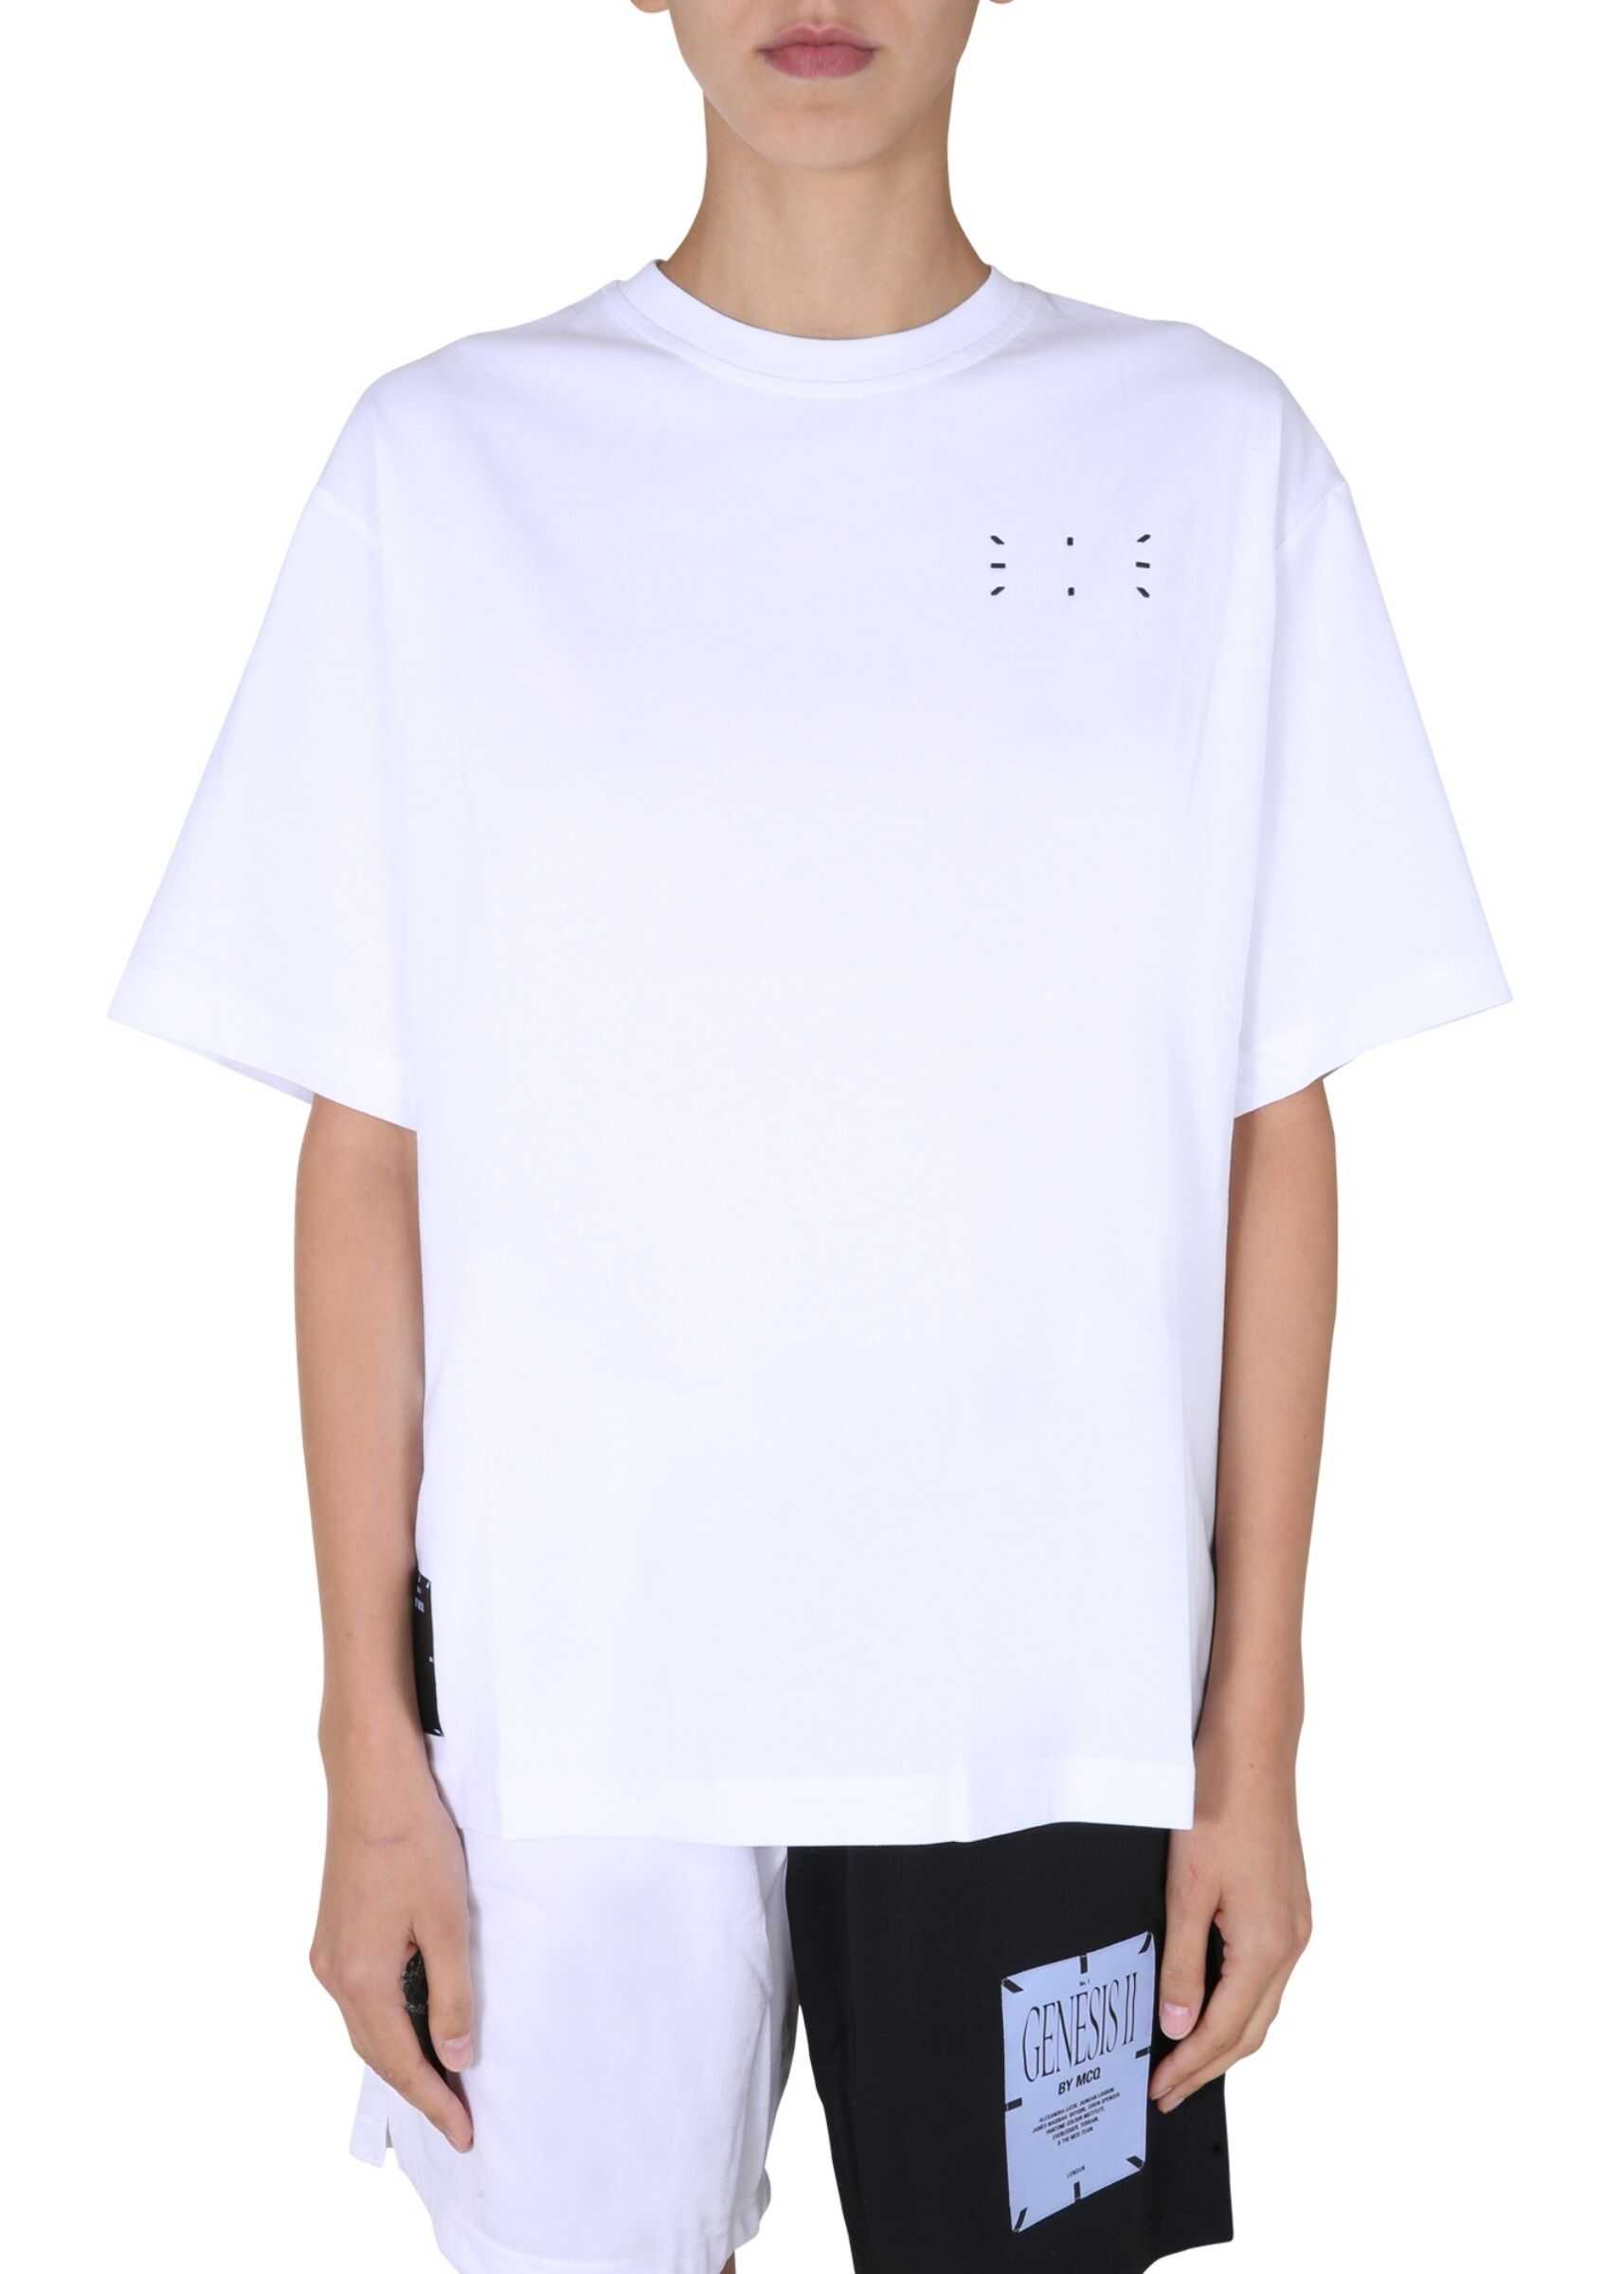 McQ Relaxed Fit T-Shirt WHITE image3